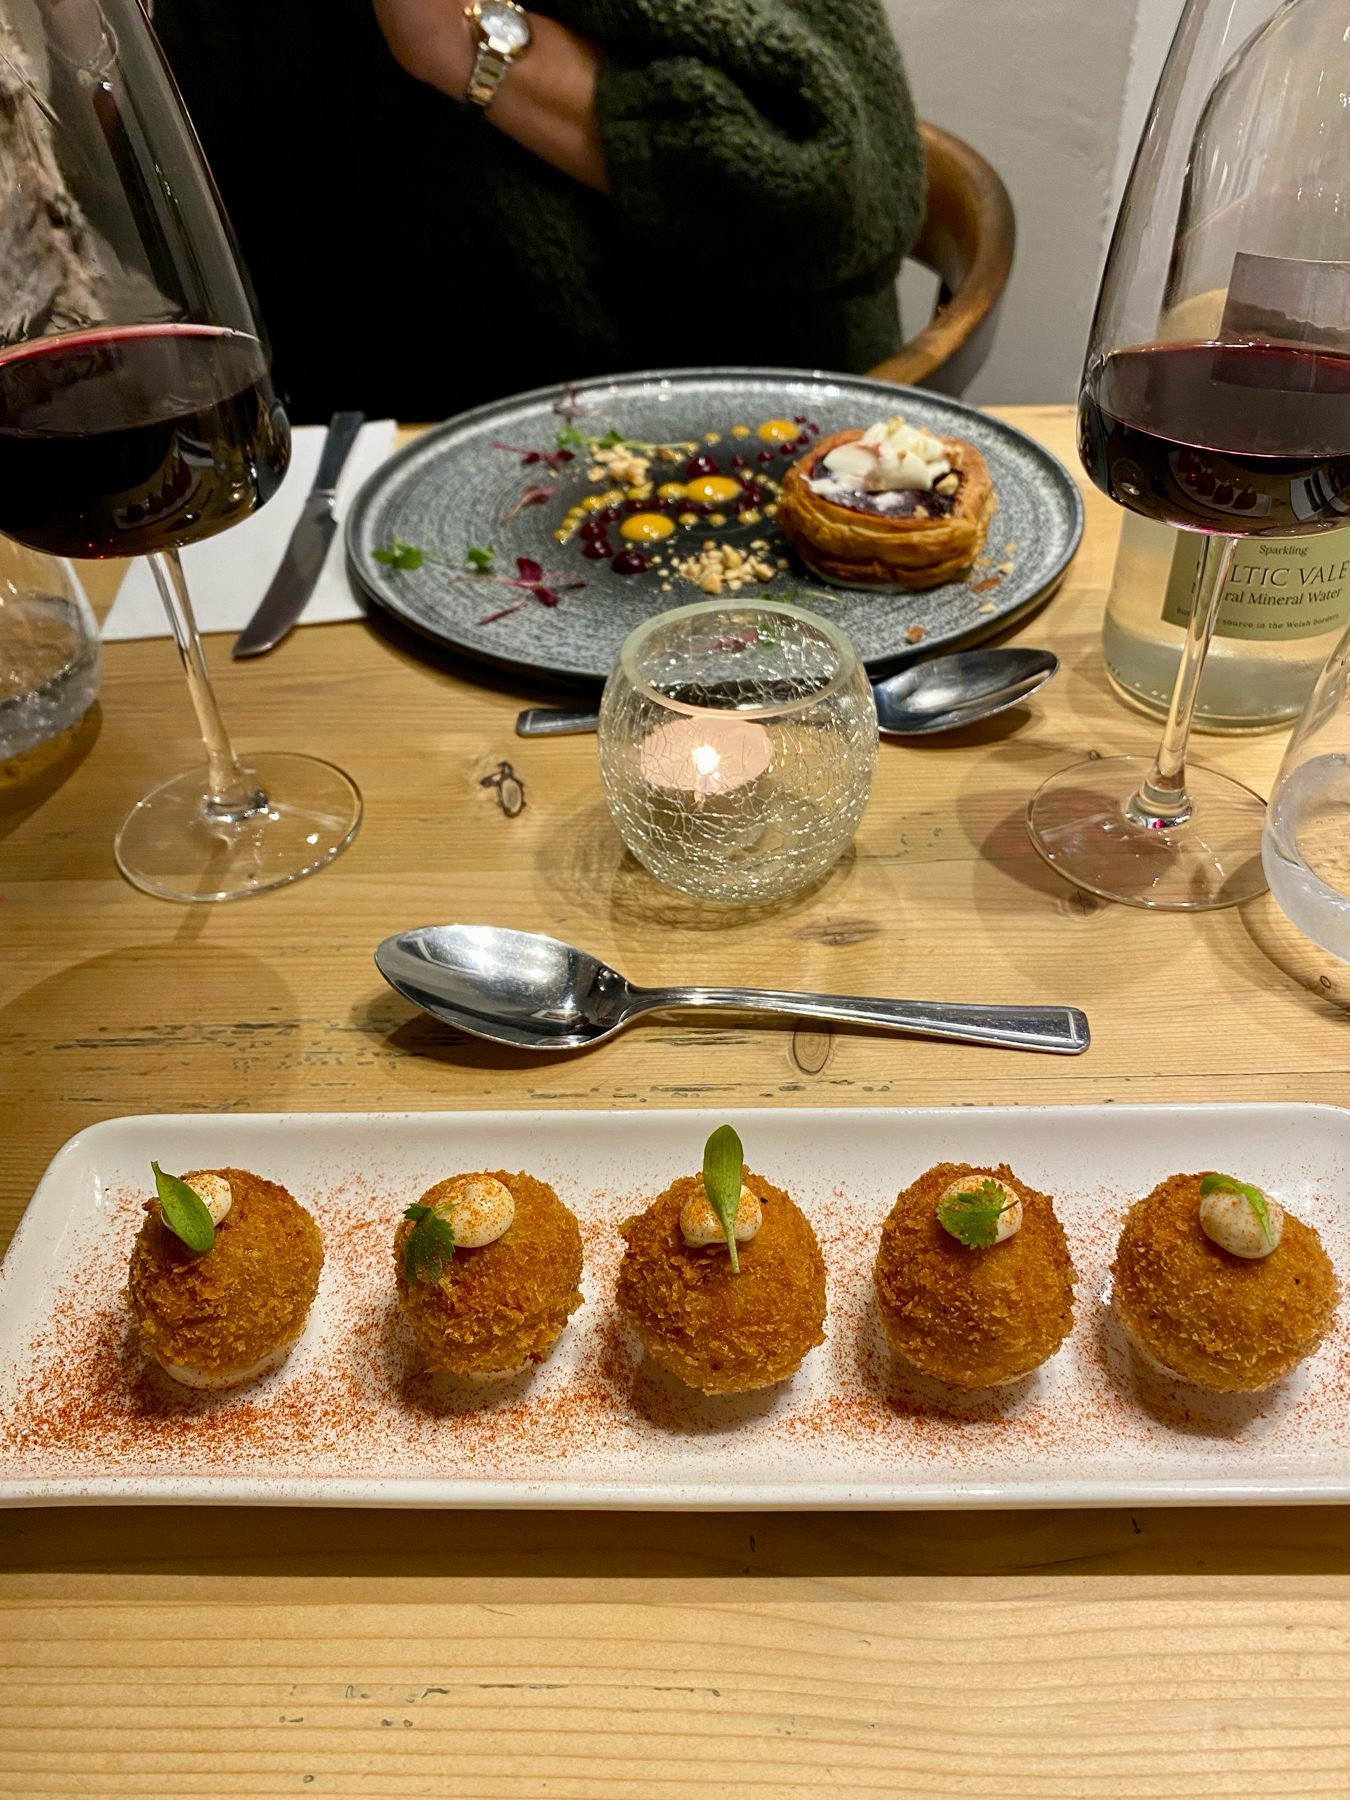 A table with gourmet dishes and wine glasses; in the foreground, a plate with breaded appetizers garnished with green leaves, sprinkled with paprika; in the background, two glasses of red wine, another dish with colorful food